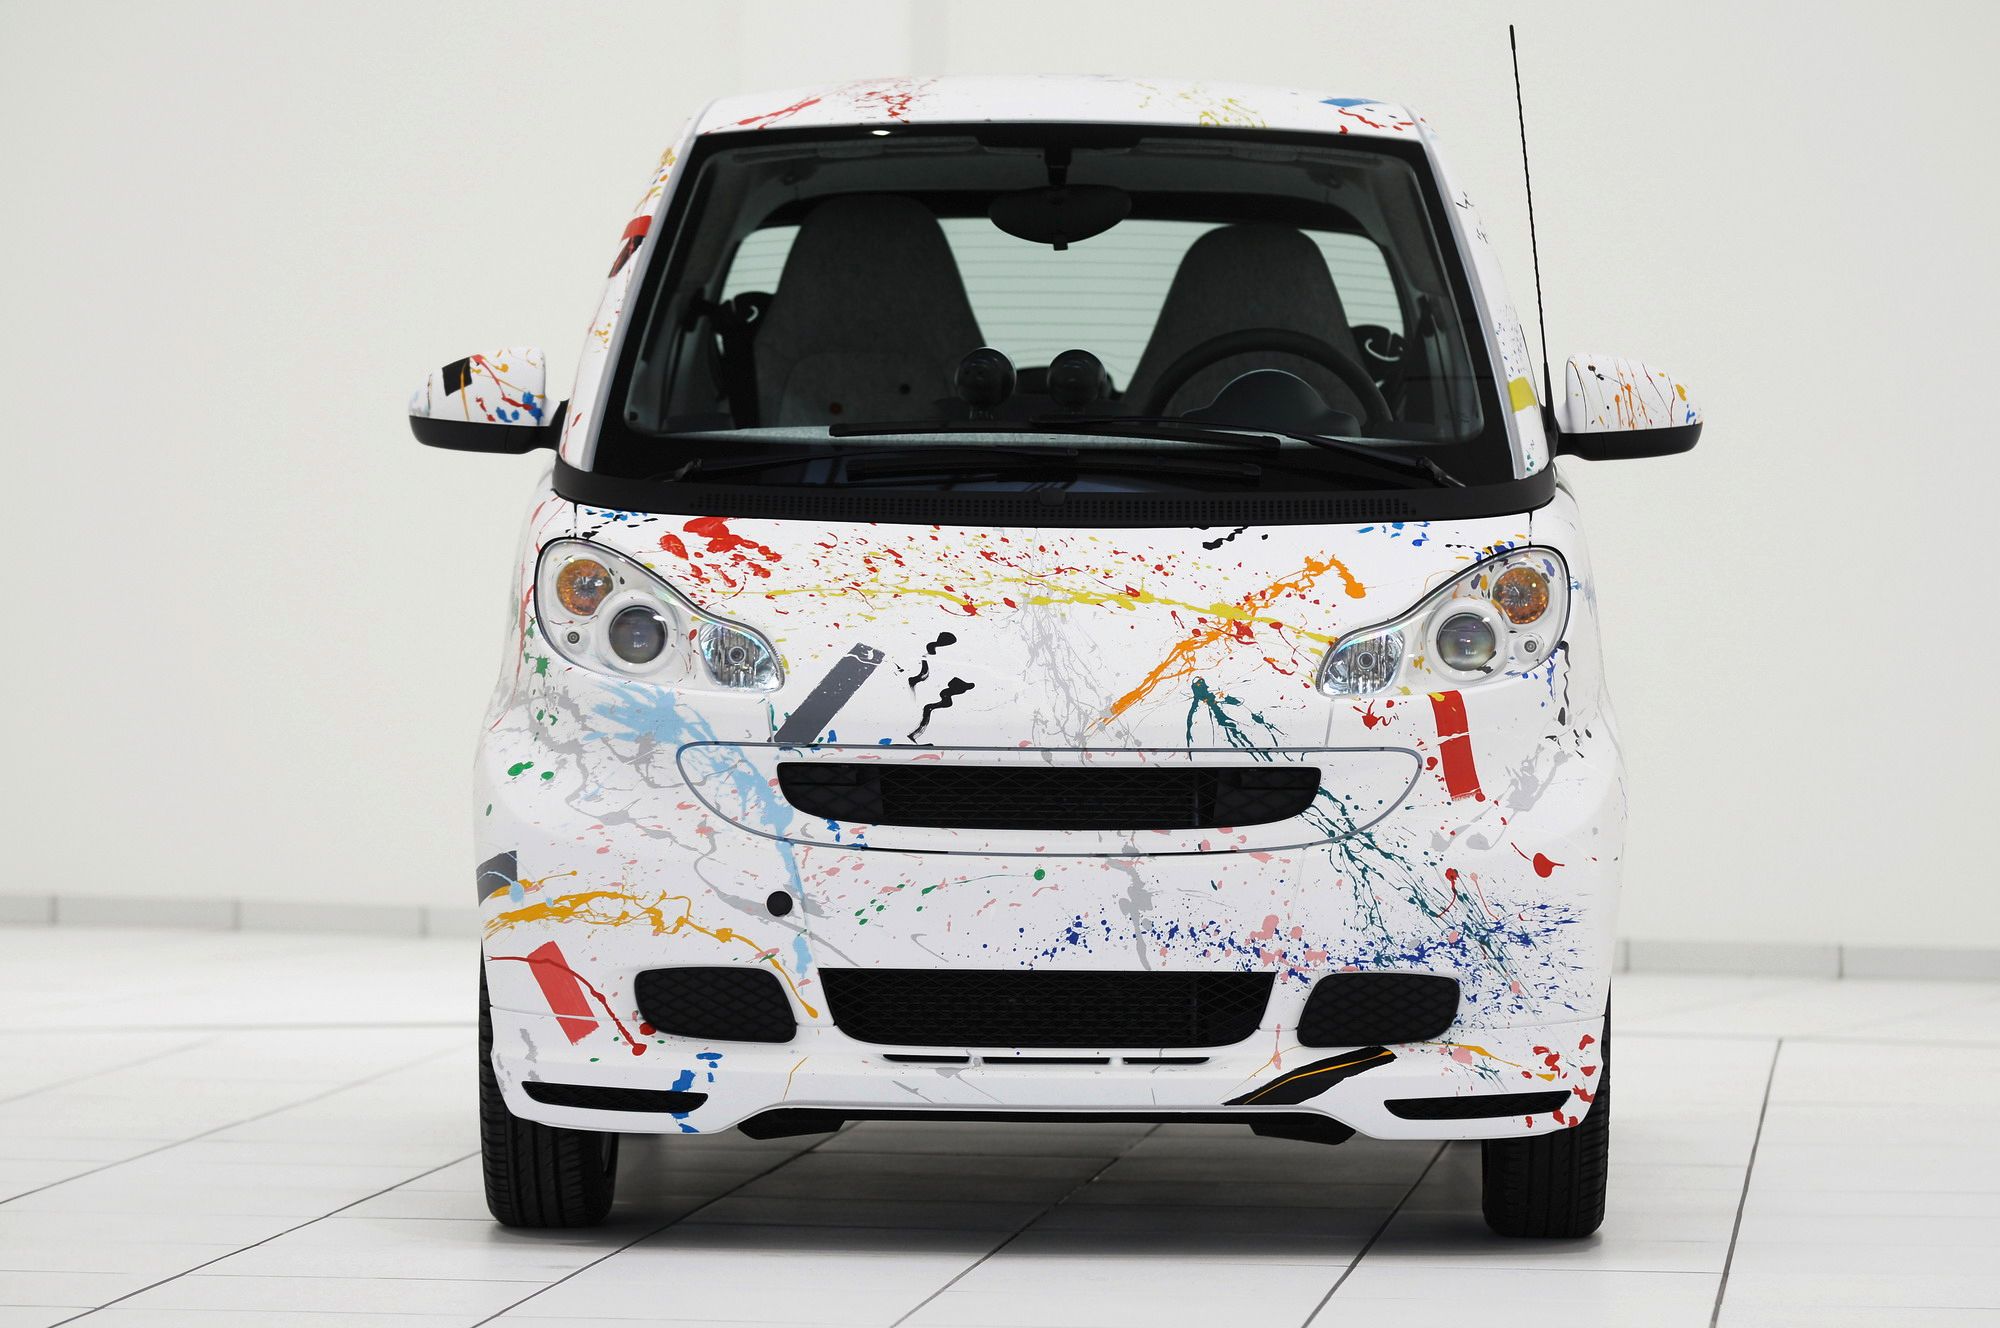 2010 Smart Fortwo Sprinkle by Rolf Sachs